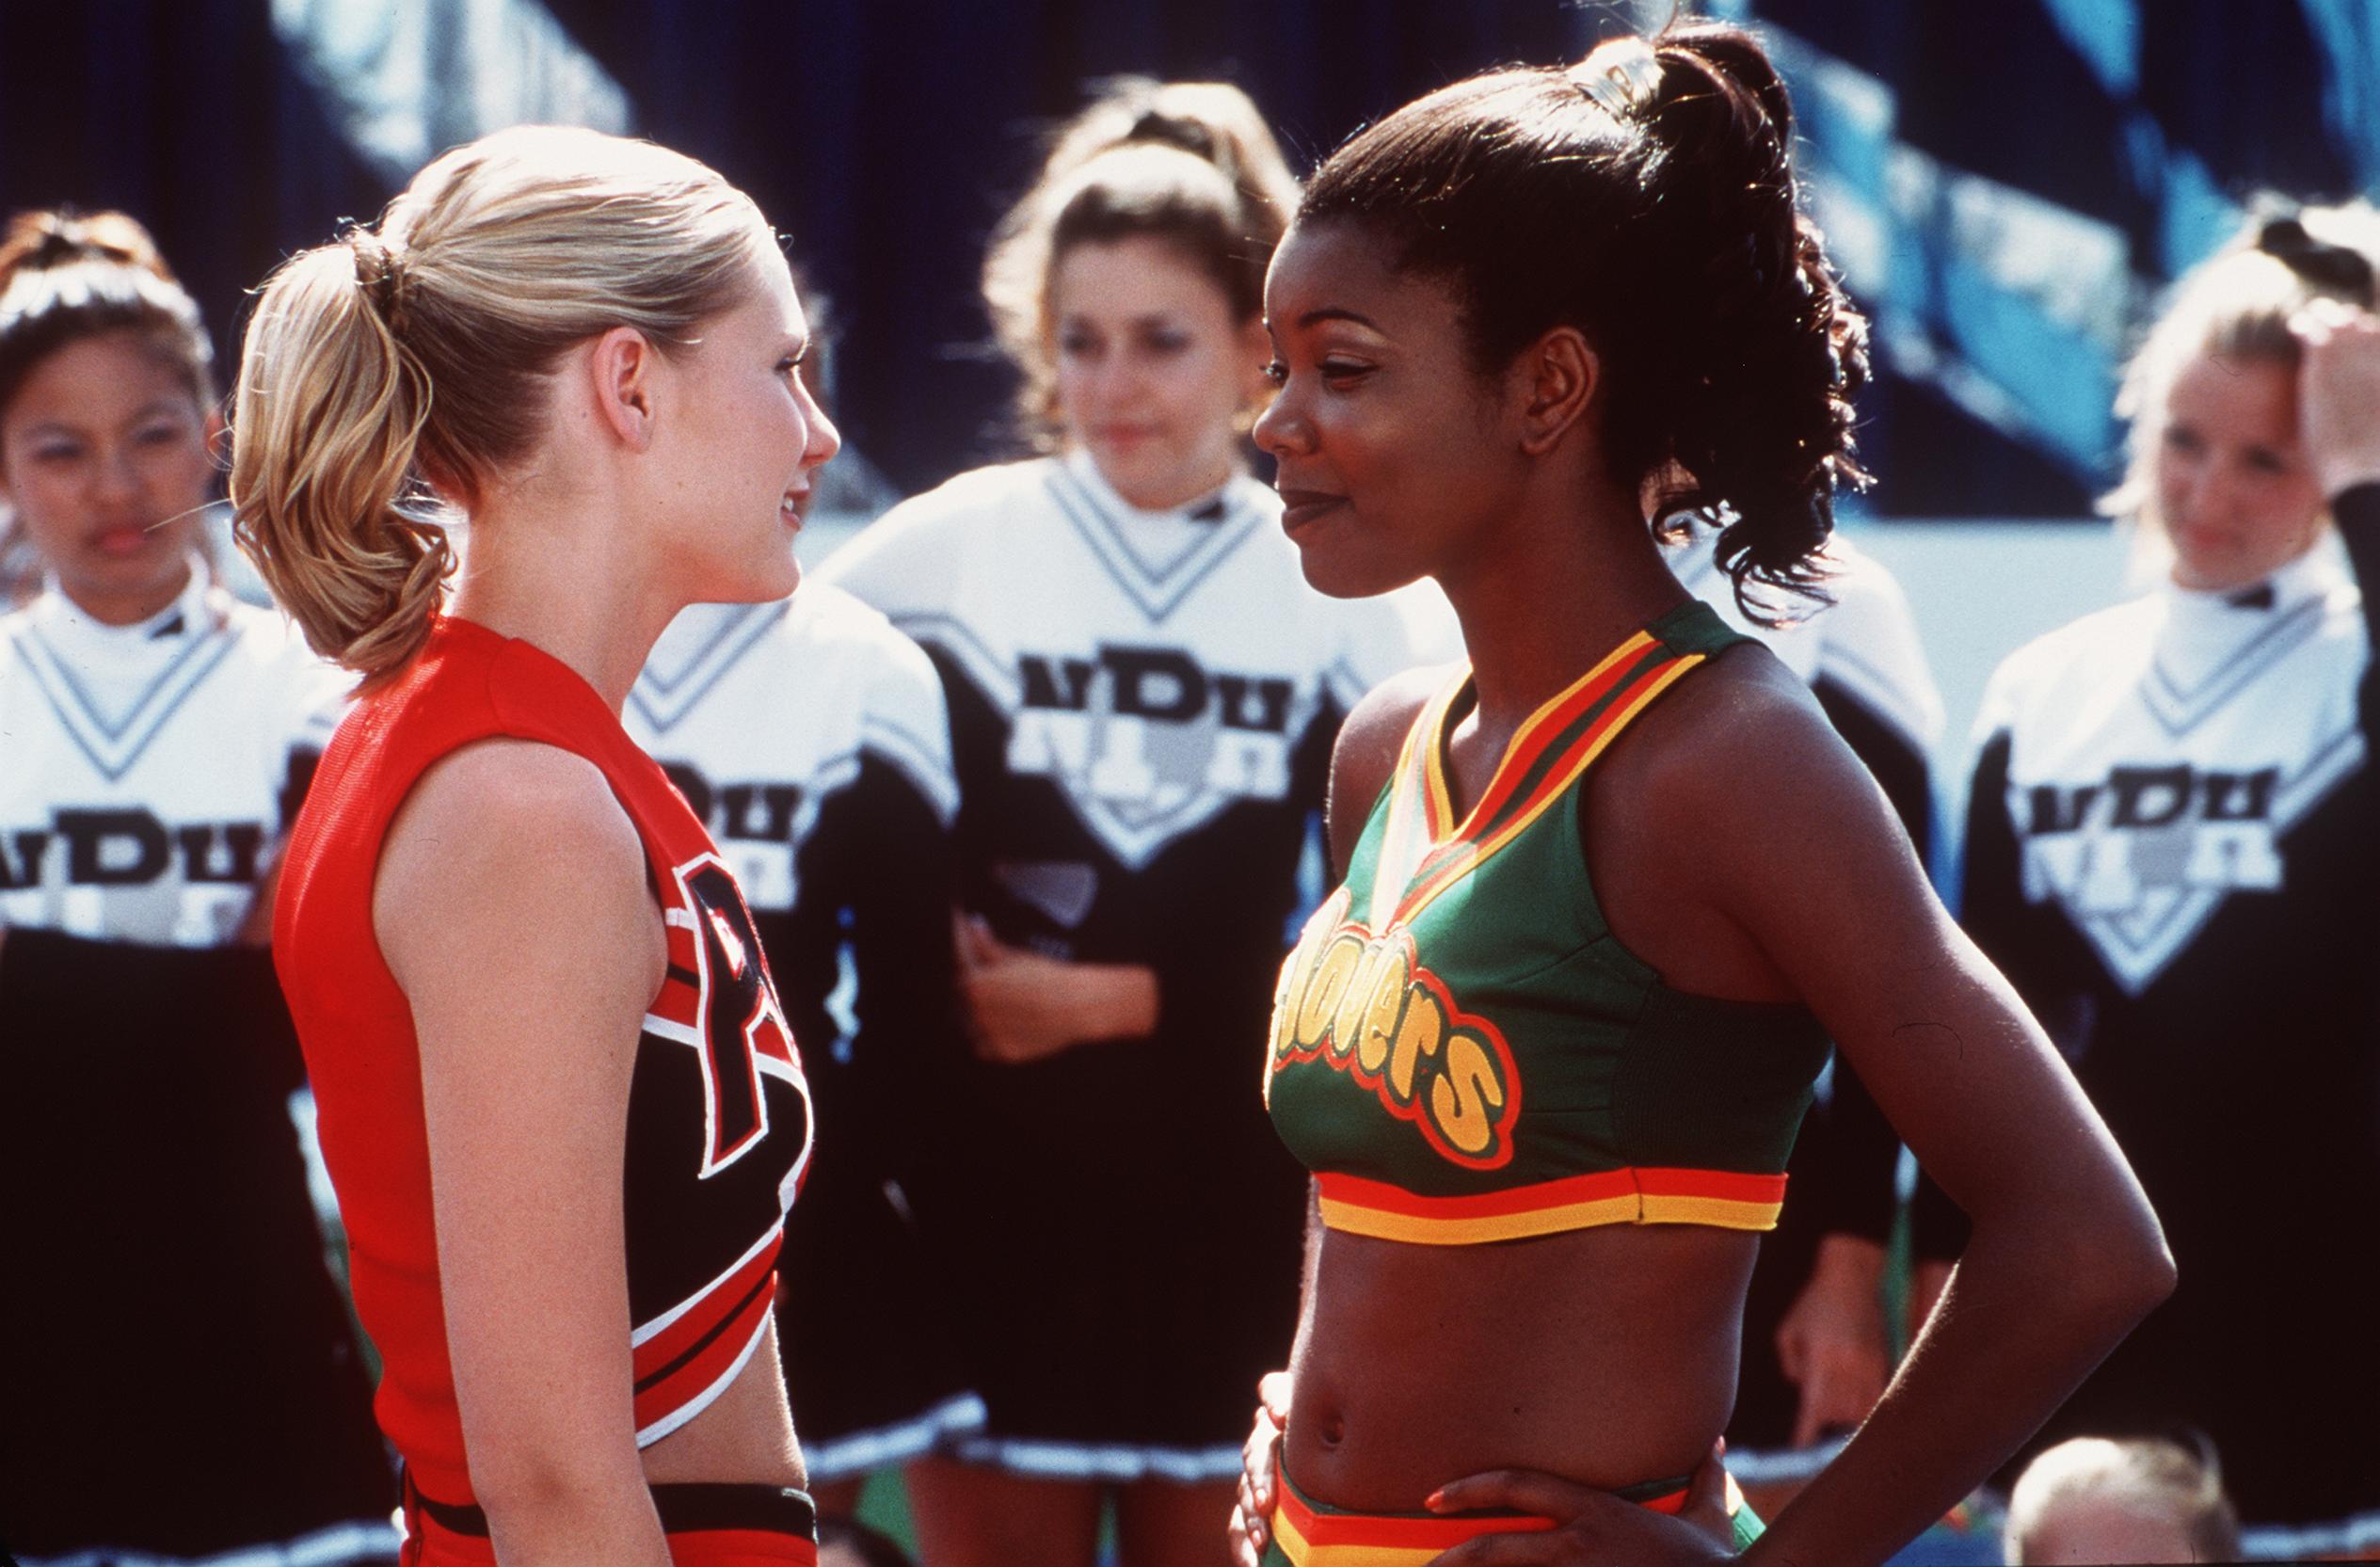 A clip from the "Bring It On" movie starring Kirsten Dunst and Gabrielle Union. | Photo: Getty Images